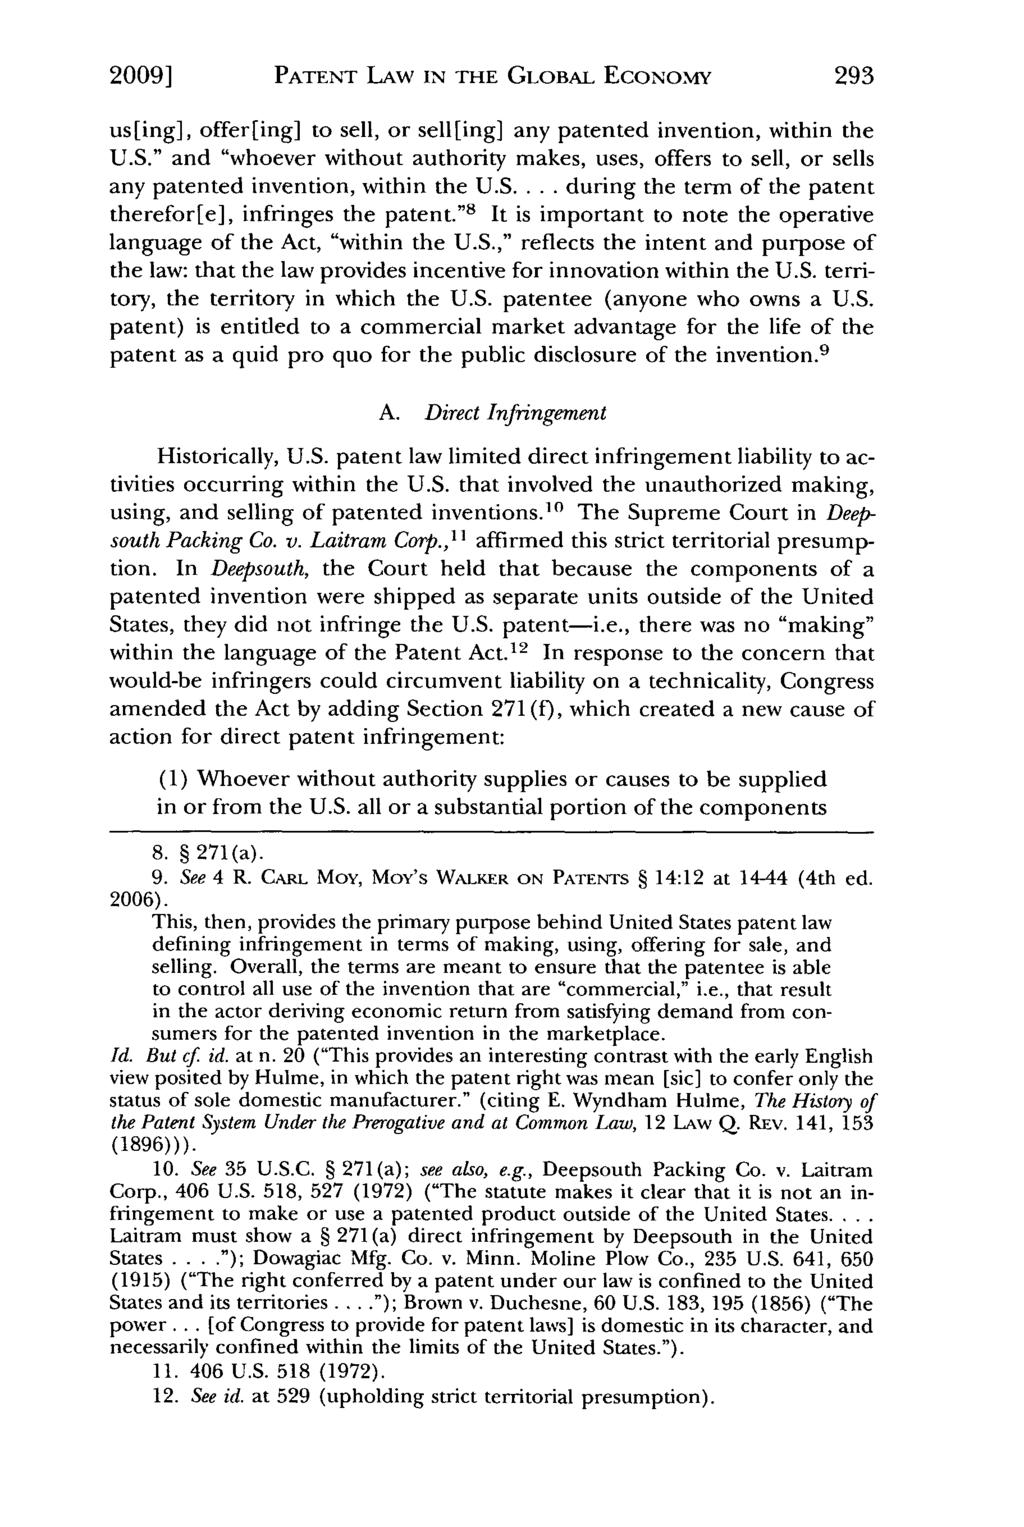 2009] Keyhani: Patent Law in the Global Economy: A Modest Proposal for U.S. Pate PATENT LAW IN THE GLOBAL ECONOMY us[ing], offer[ing] to sell, or sell[ing] any patented invention, within the U.S." and "whoever without authority makes, uses, offers to sell, or sells any patented invention, within the U.